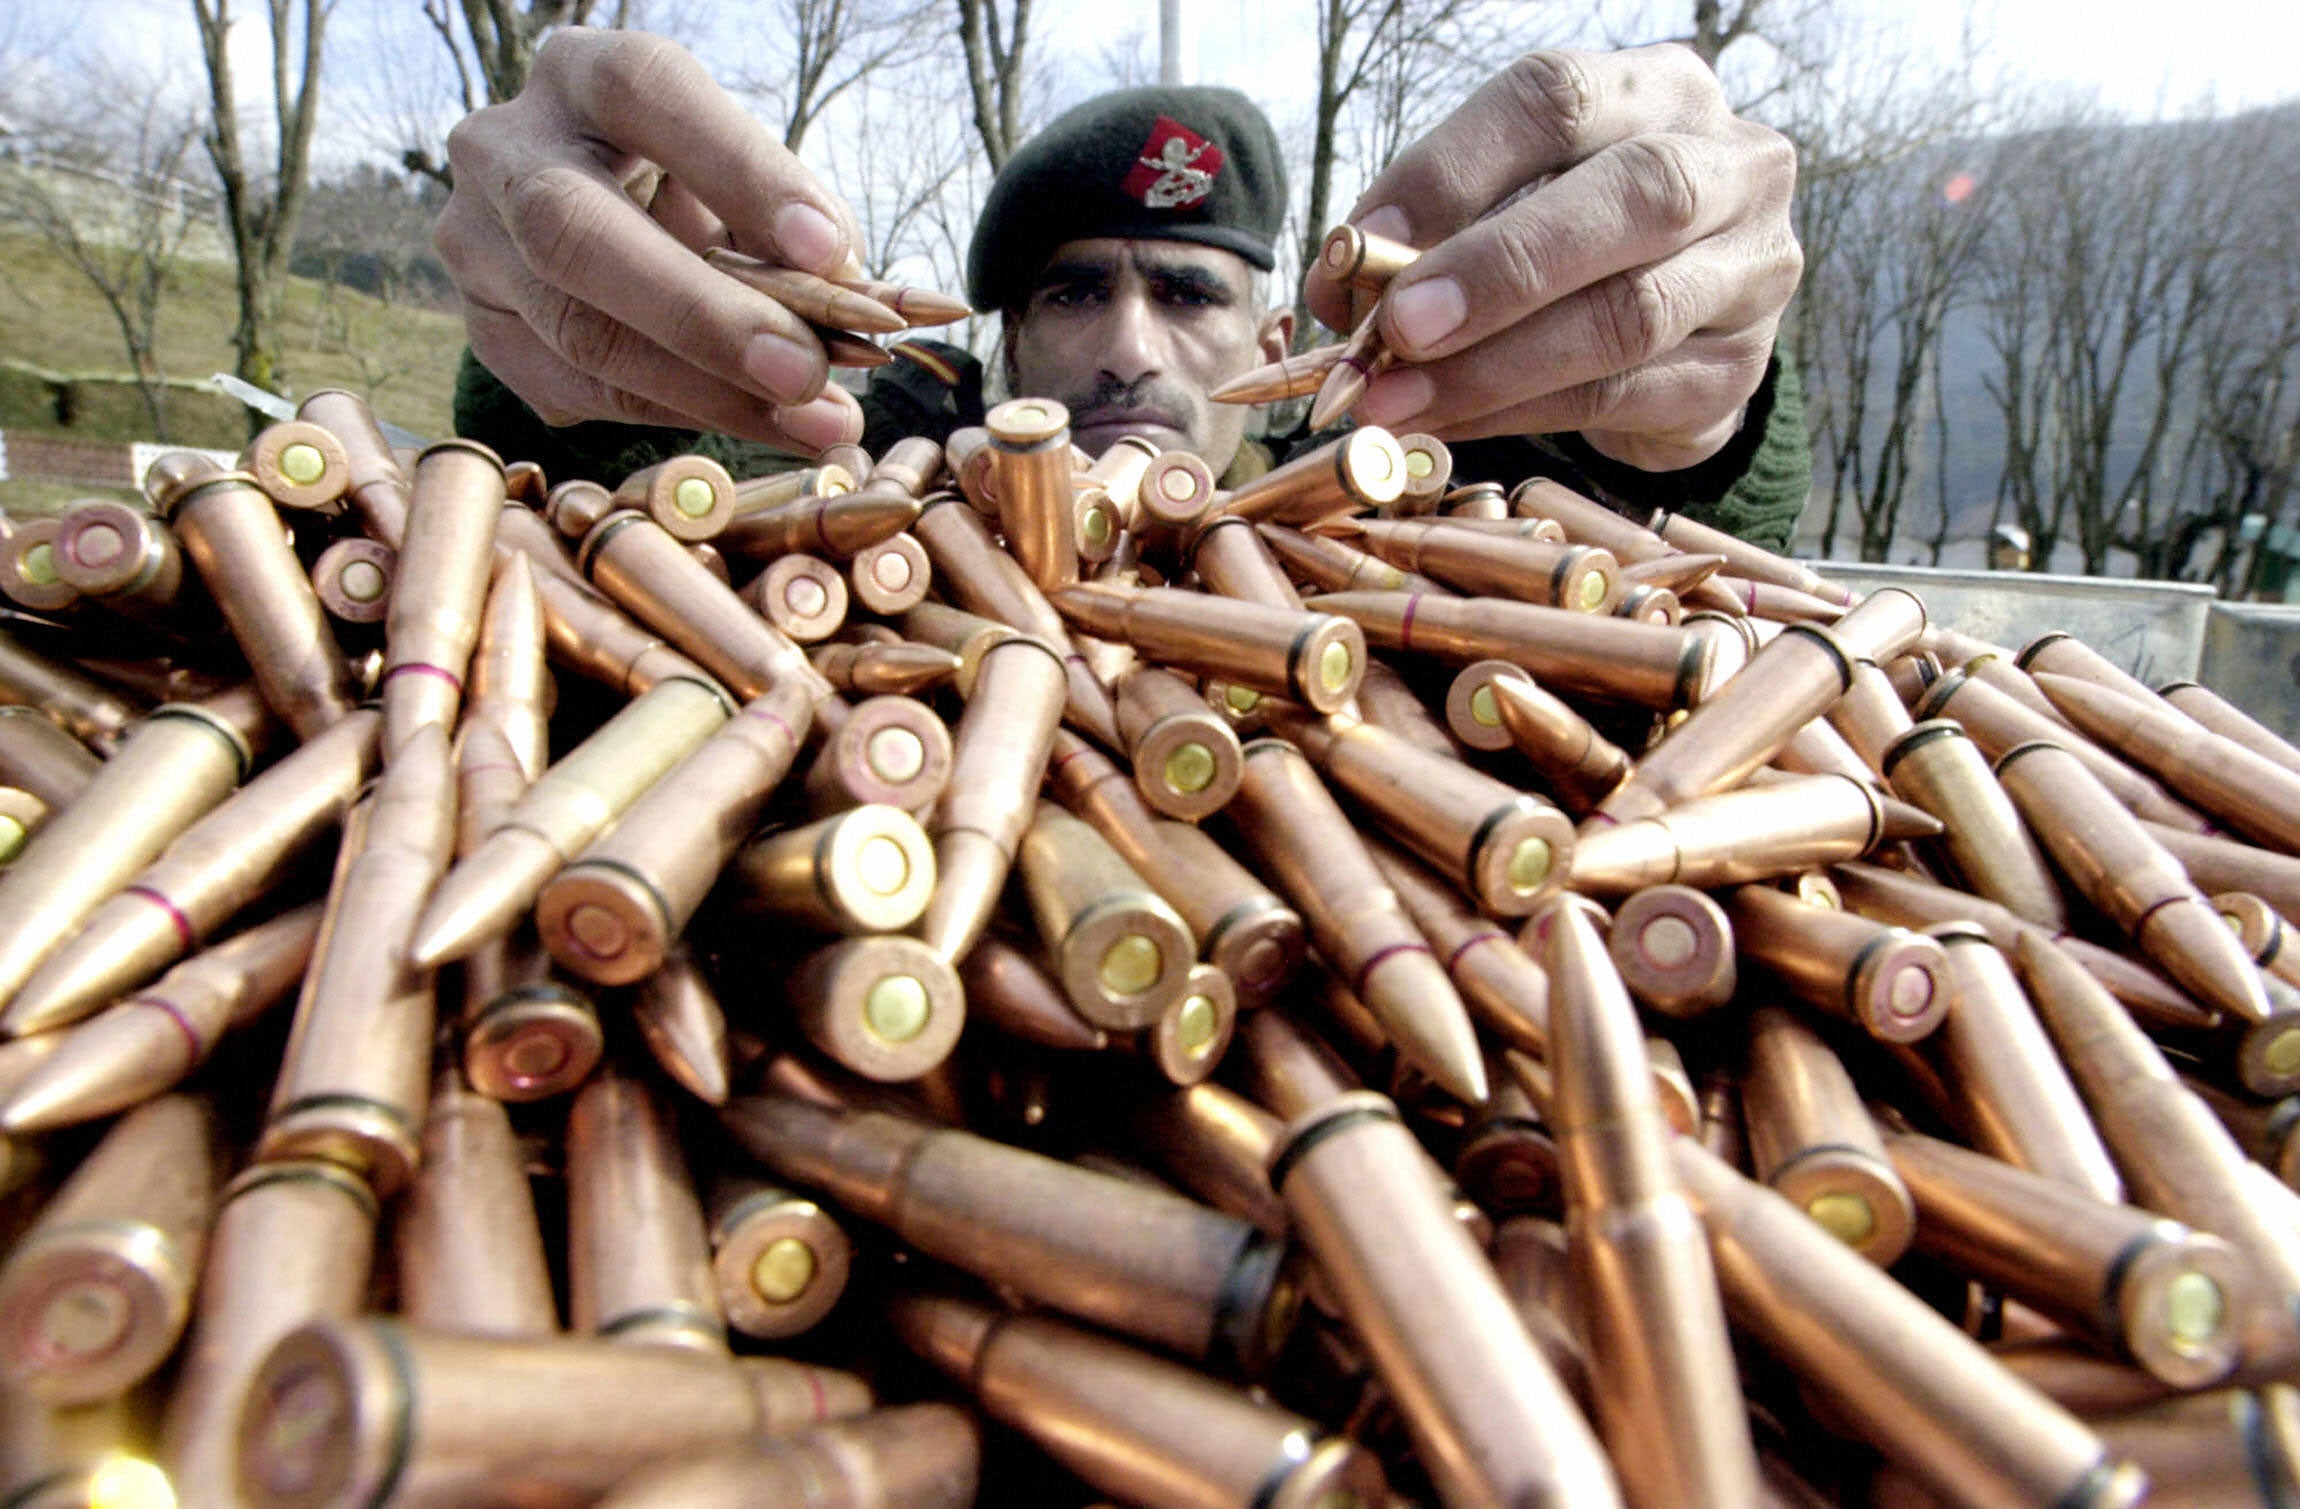 An Indian army soldier displays bullets seized from rebels